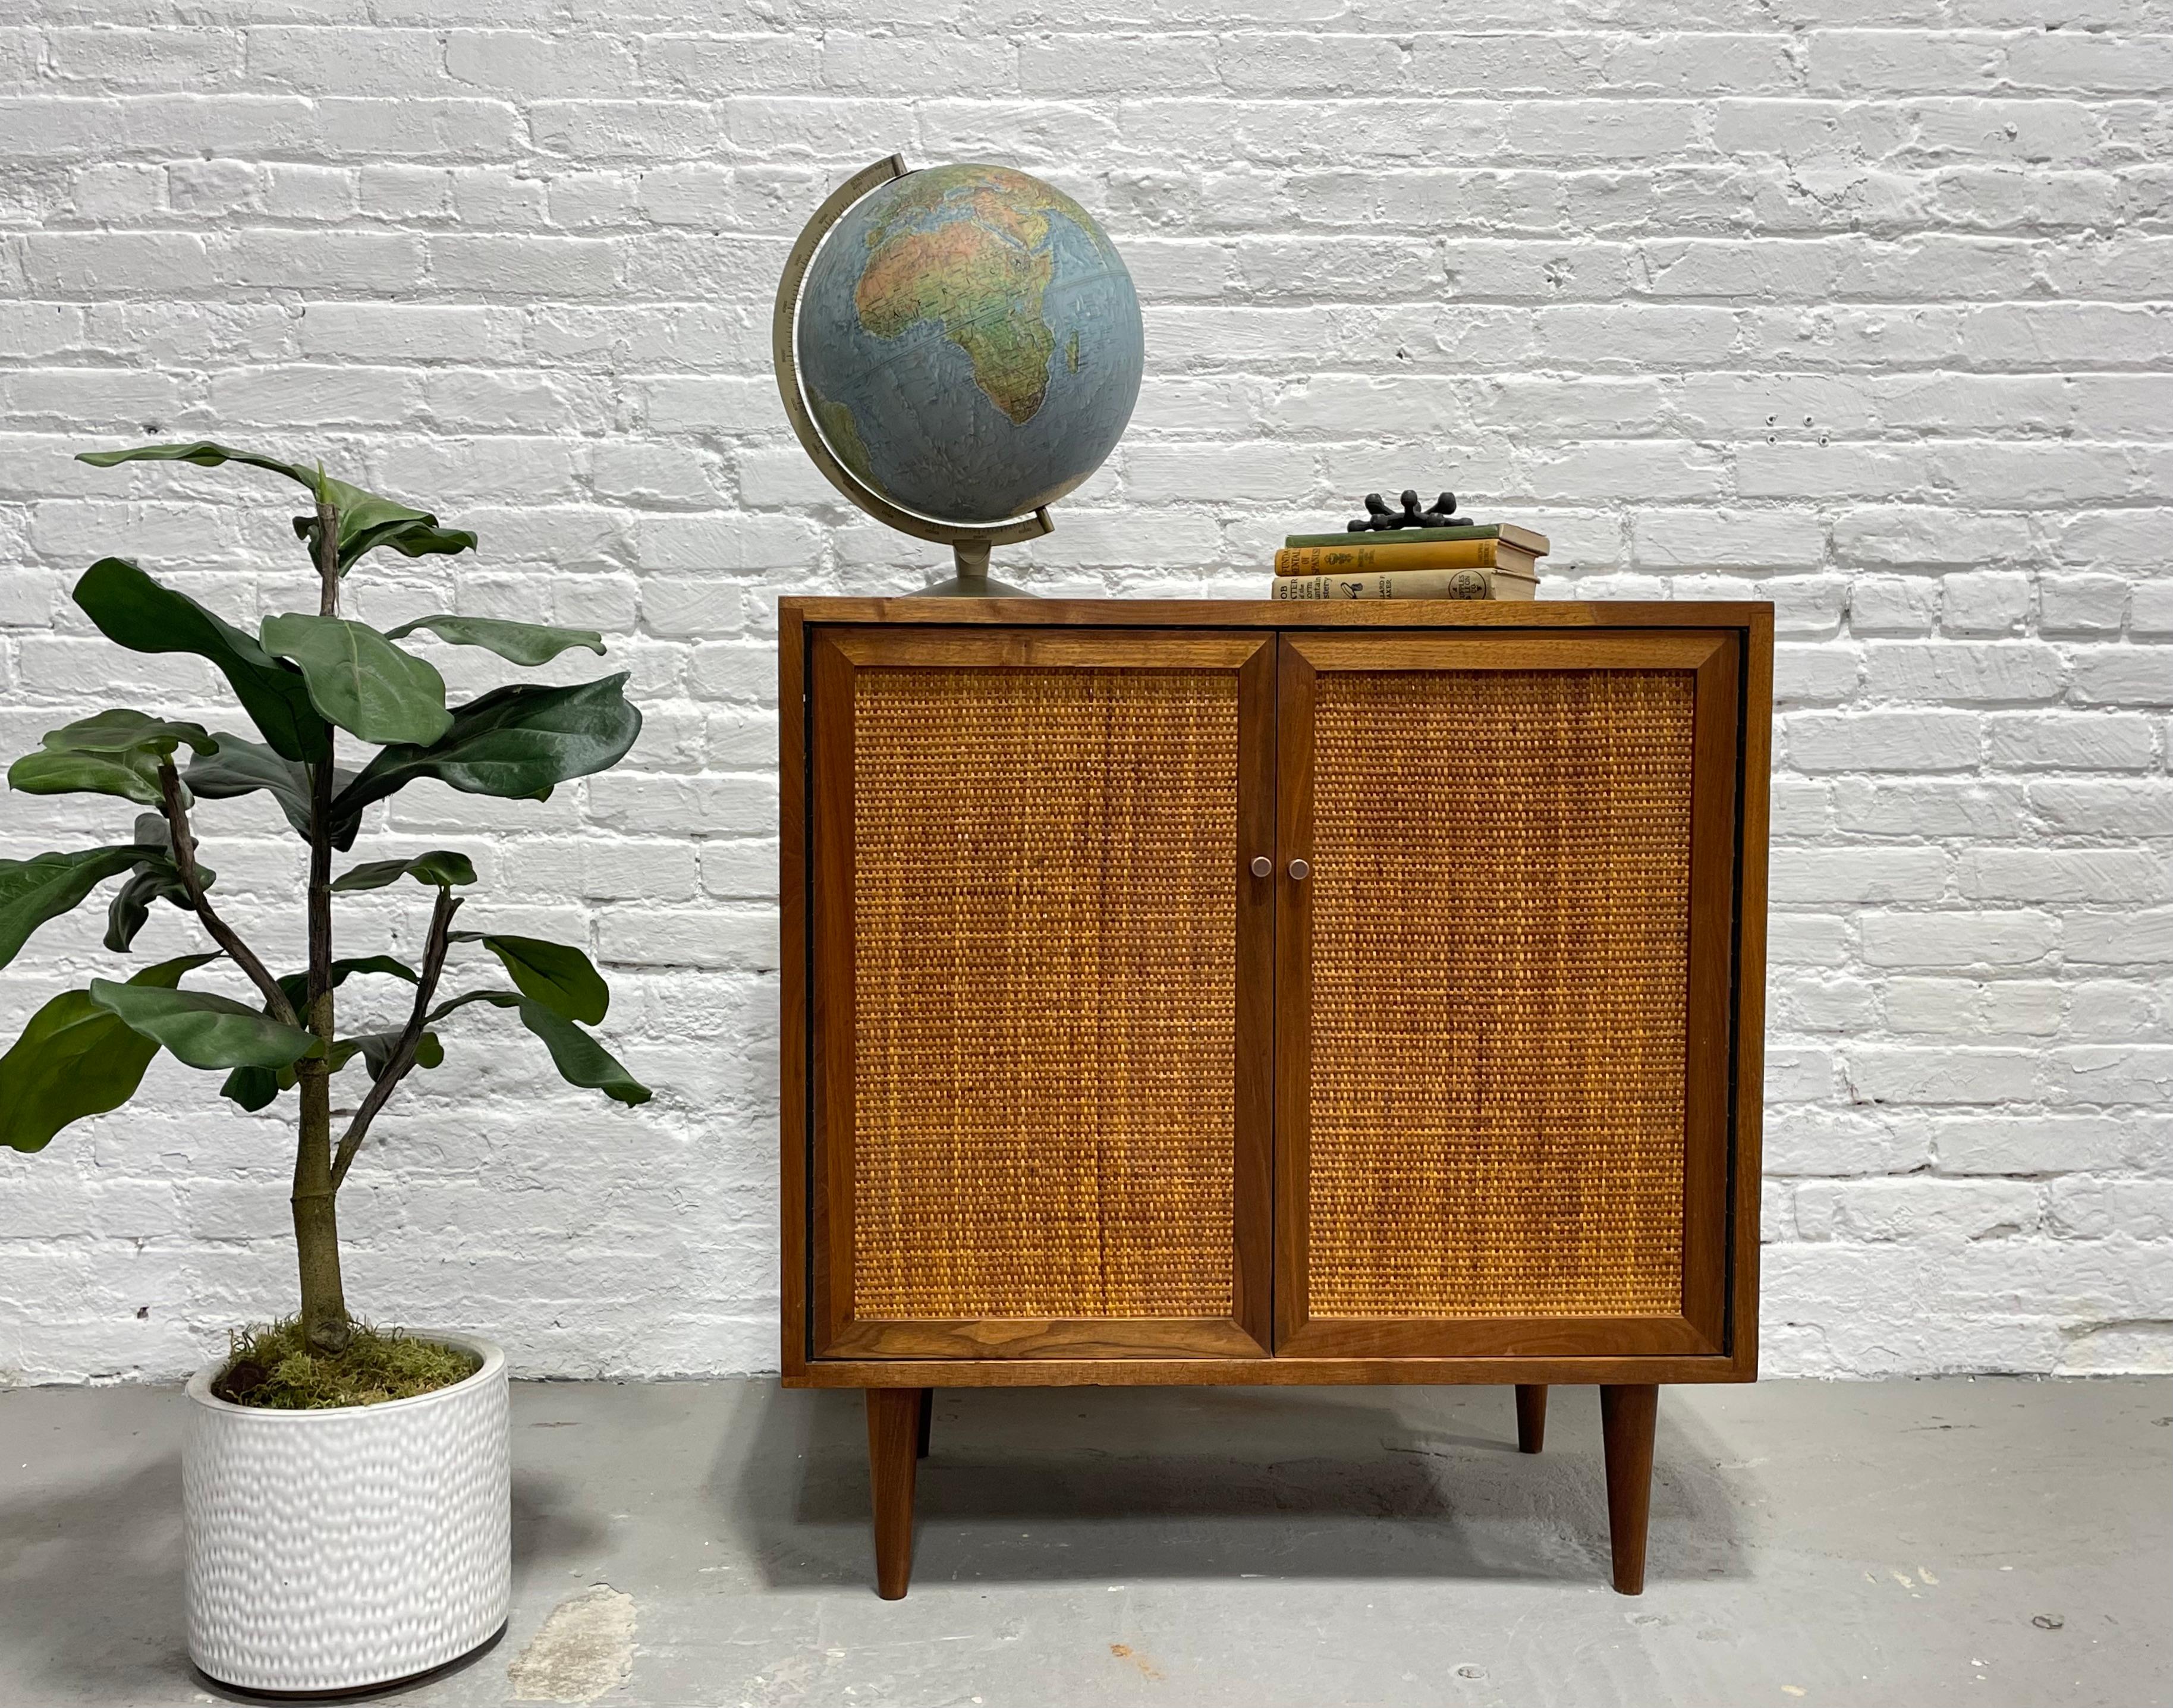 Mid-Century Modern Walnut Jr. Credenza / Vinyl Storage Cabinet, circa 1960s. This beauty features perfect rattan doors that are reversible if you want to switch the look up and have simple outward facing doors. Completely refinished on all sides